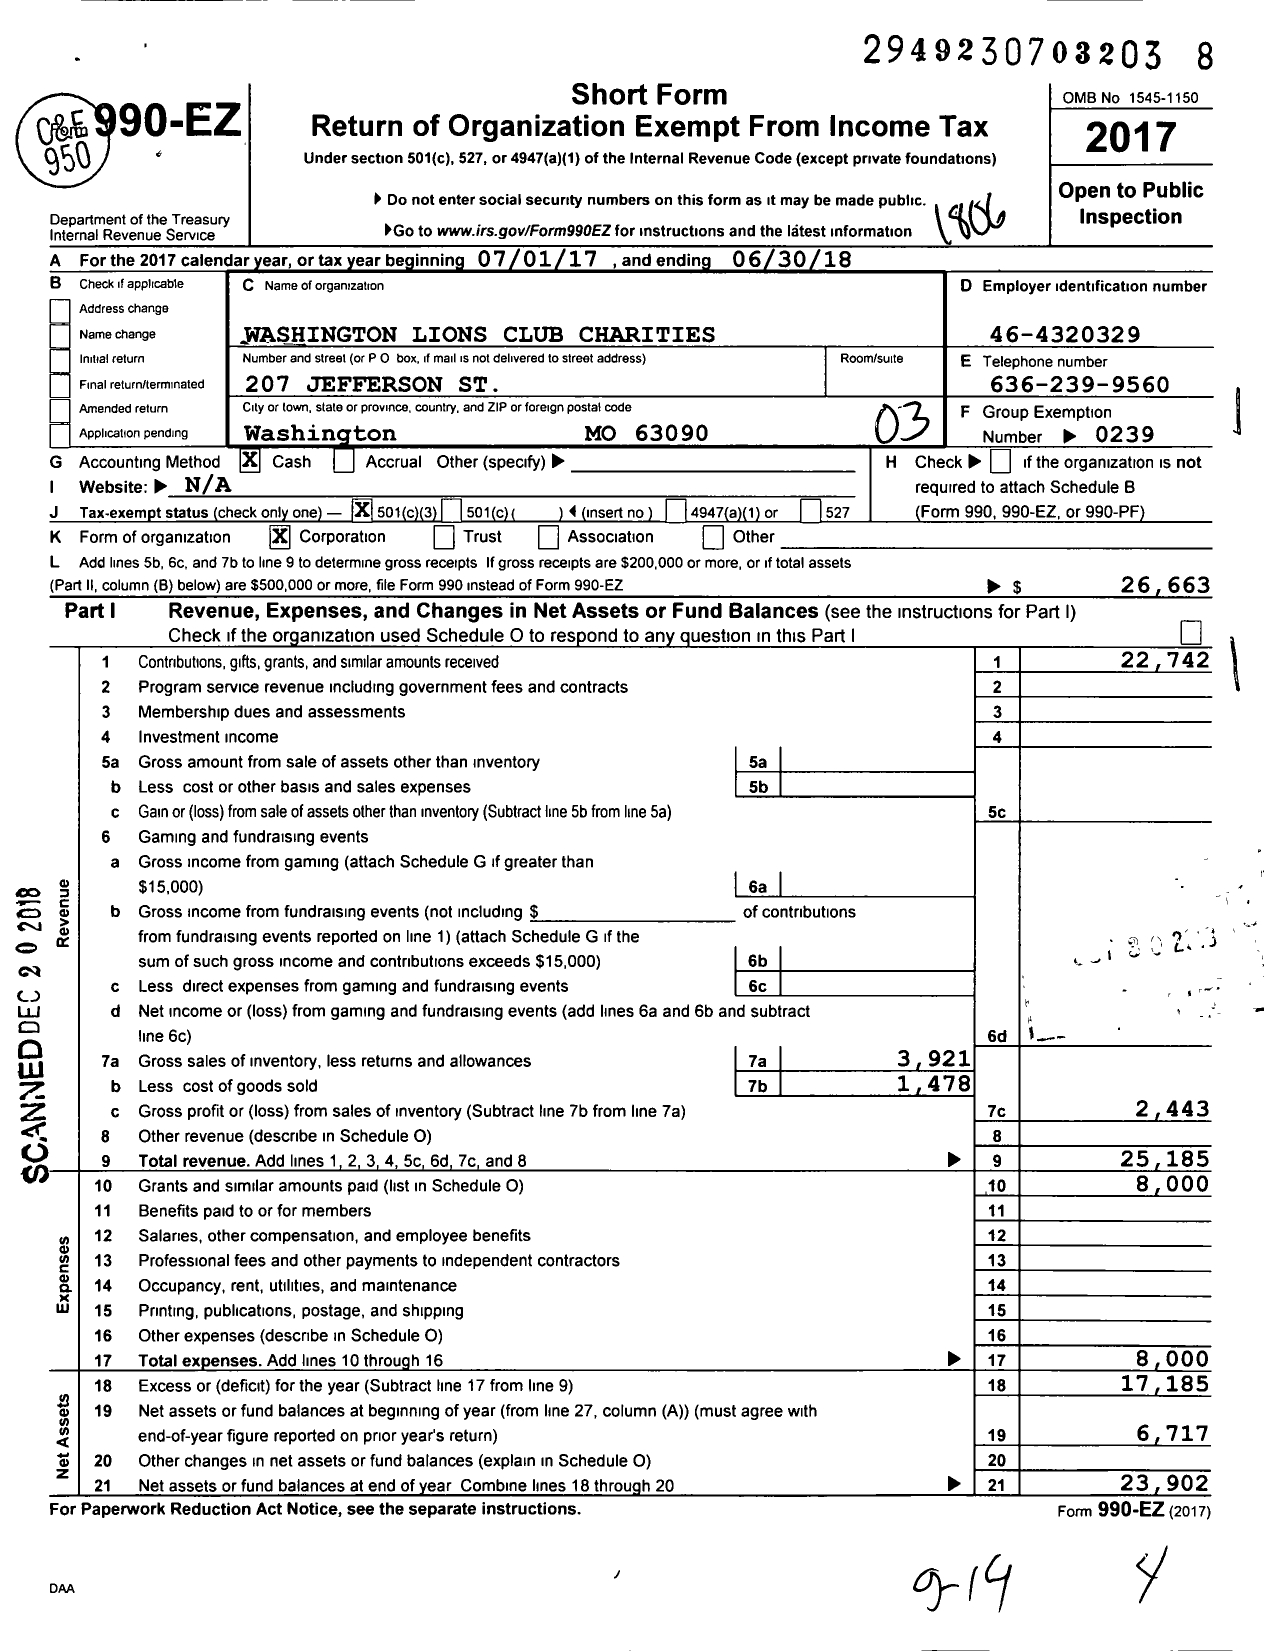 Image of first page of 2017 Form 990EZ for Washington Lions Club Charities